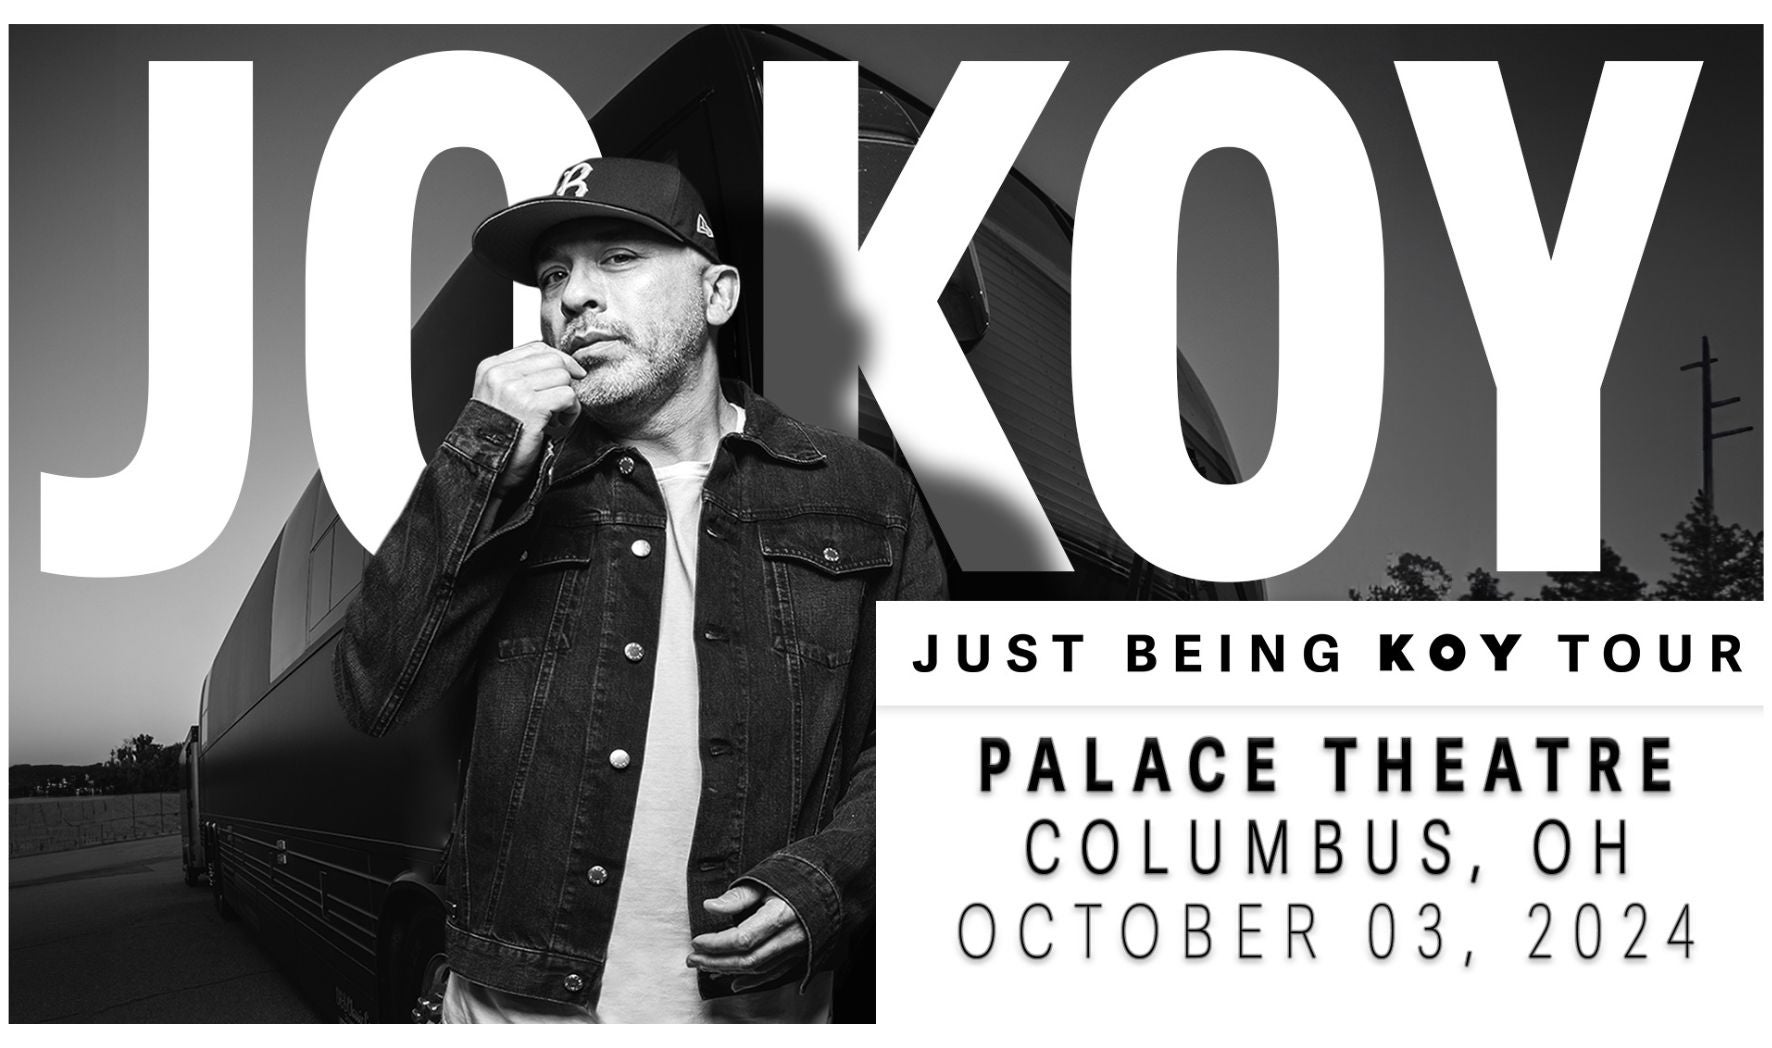 More Info for Jo Koy: Just Being Koy Tour